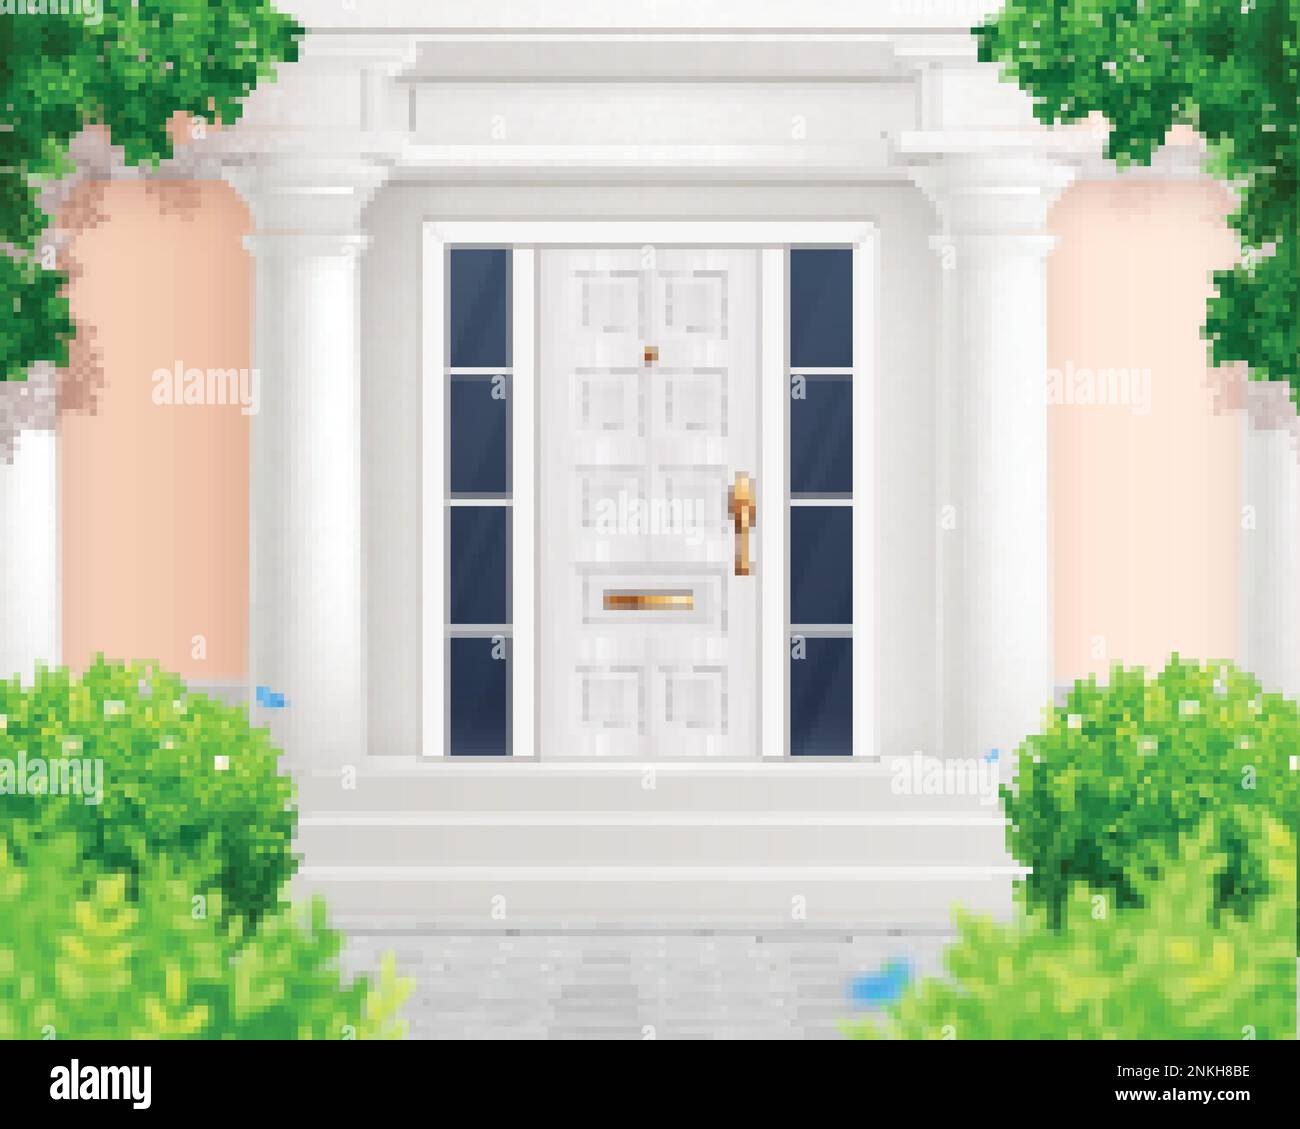 Traditional house composition with outdoor scenery and front view of home entrance surrounded by green bushes vector illustration Stock Vector